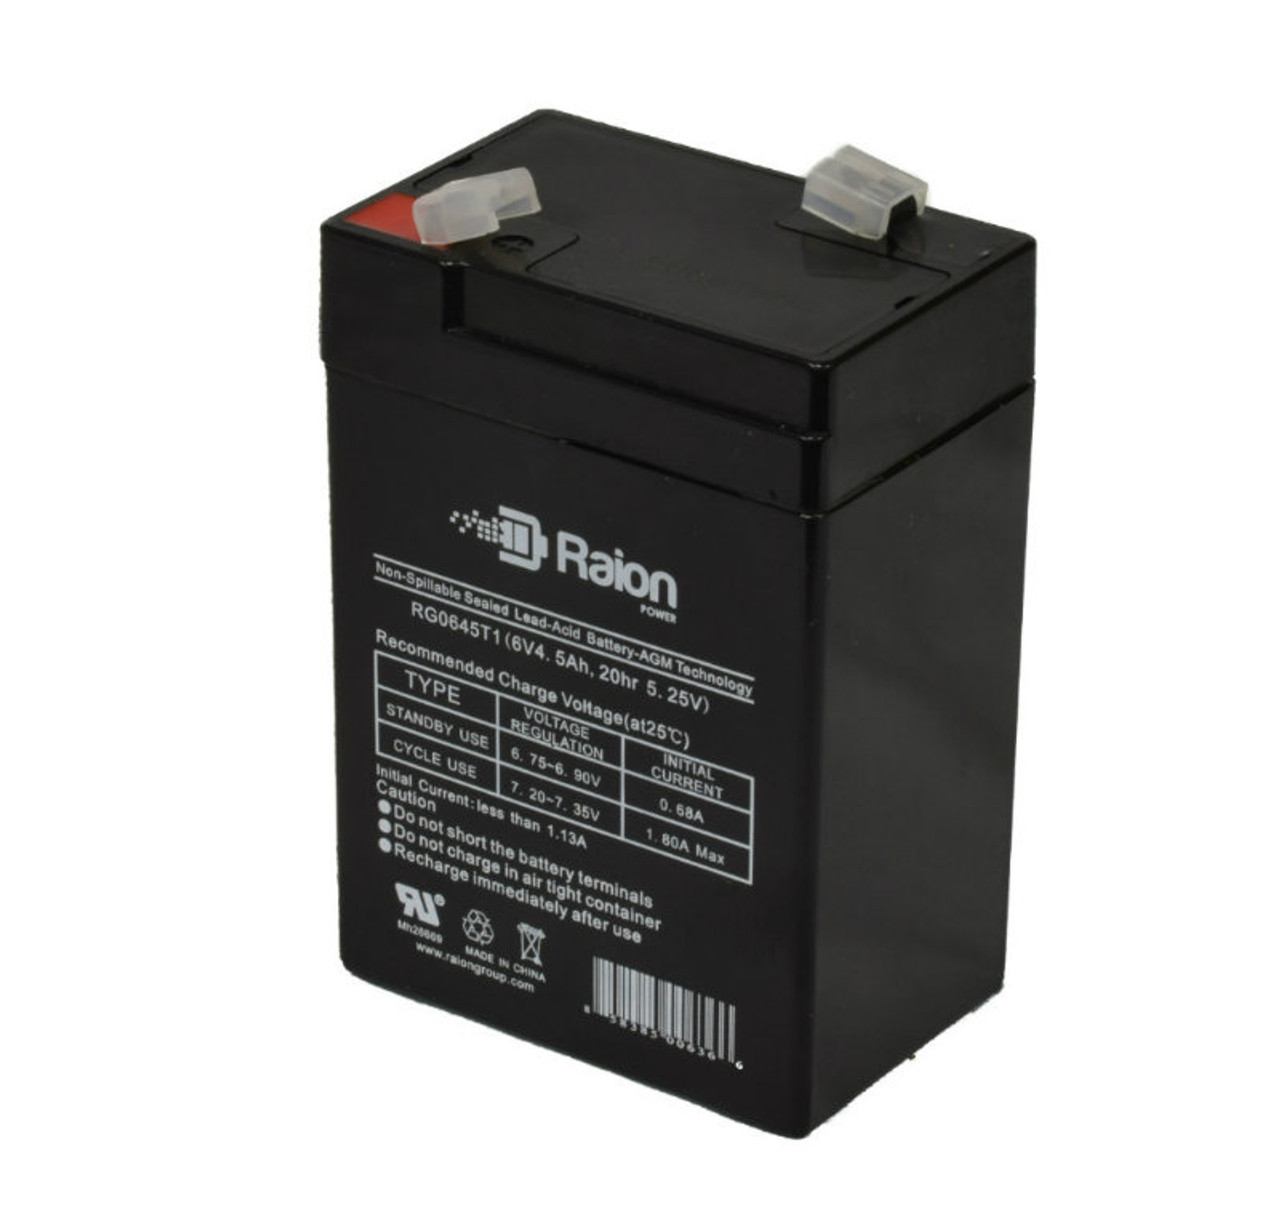 Raion Power RG0645T1 6V 4.5Ah Replacement Battery Cartridge for XNB SN06004